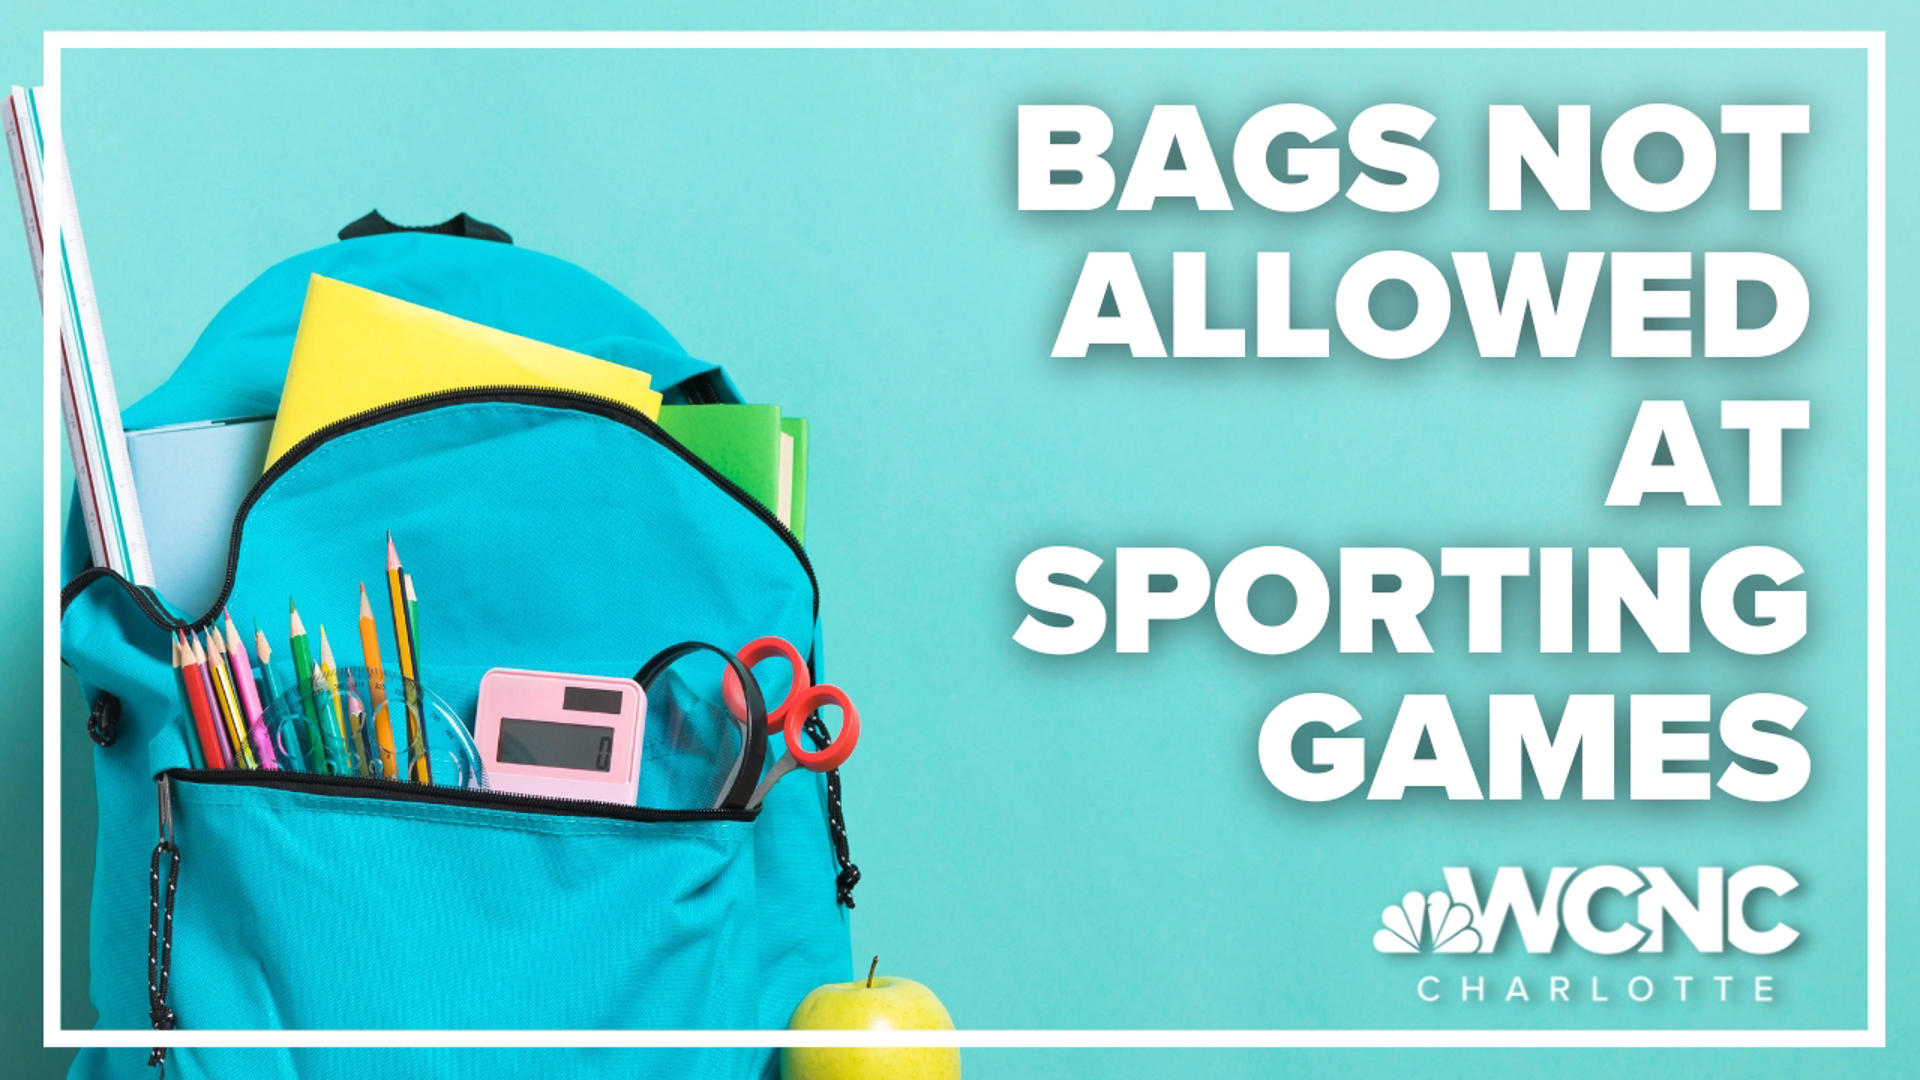 Rockingham County Schools adopts clear bag policy for sporting events